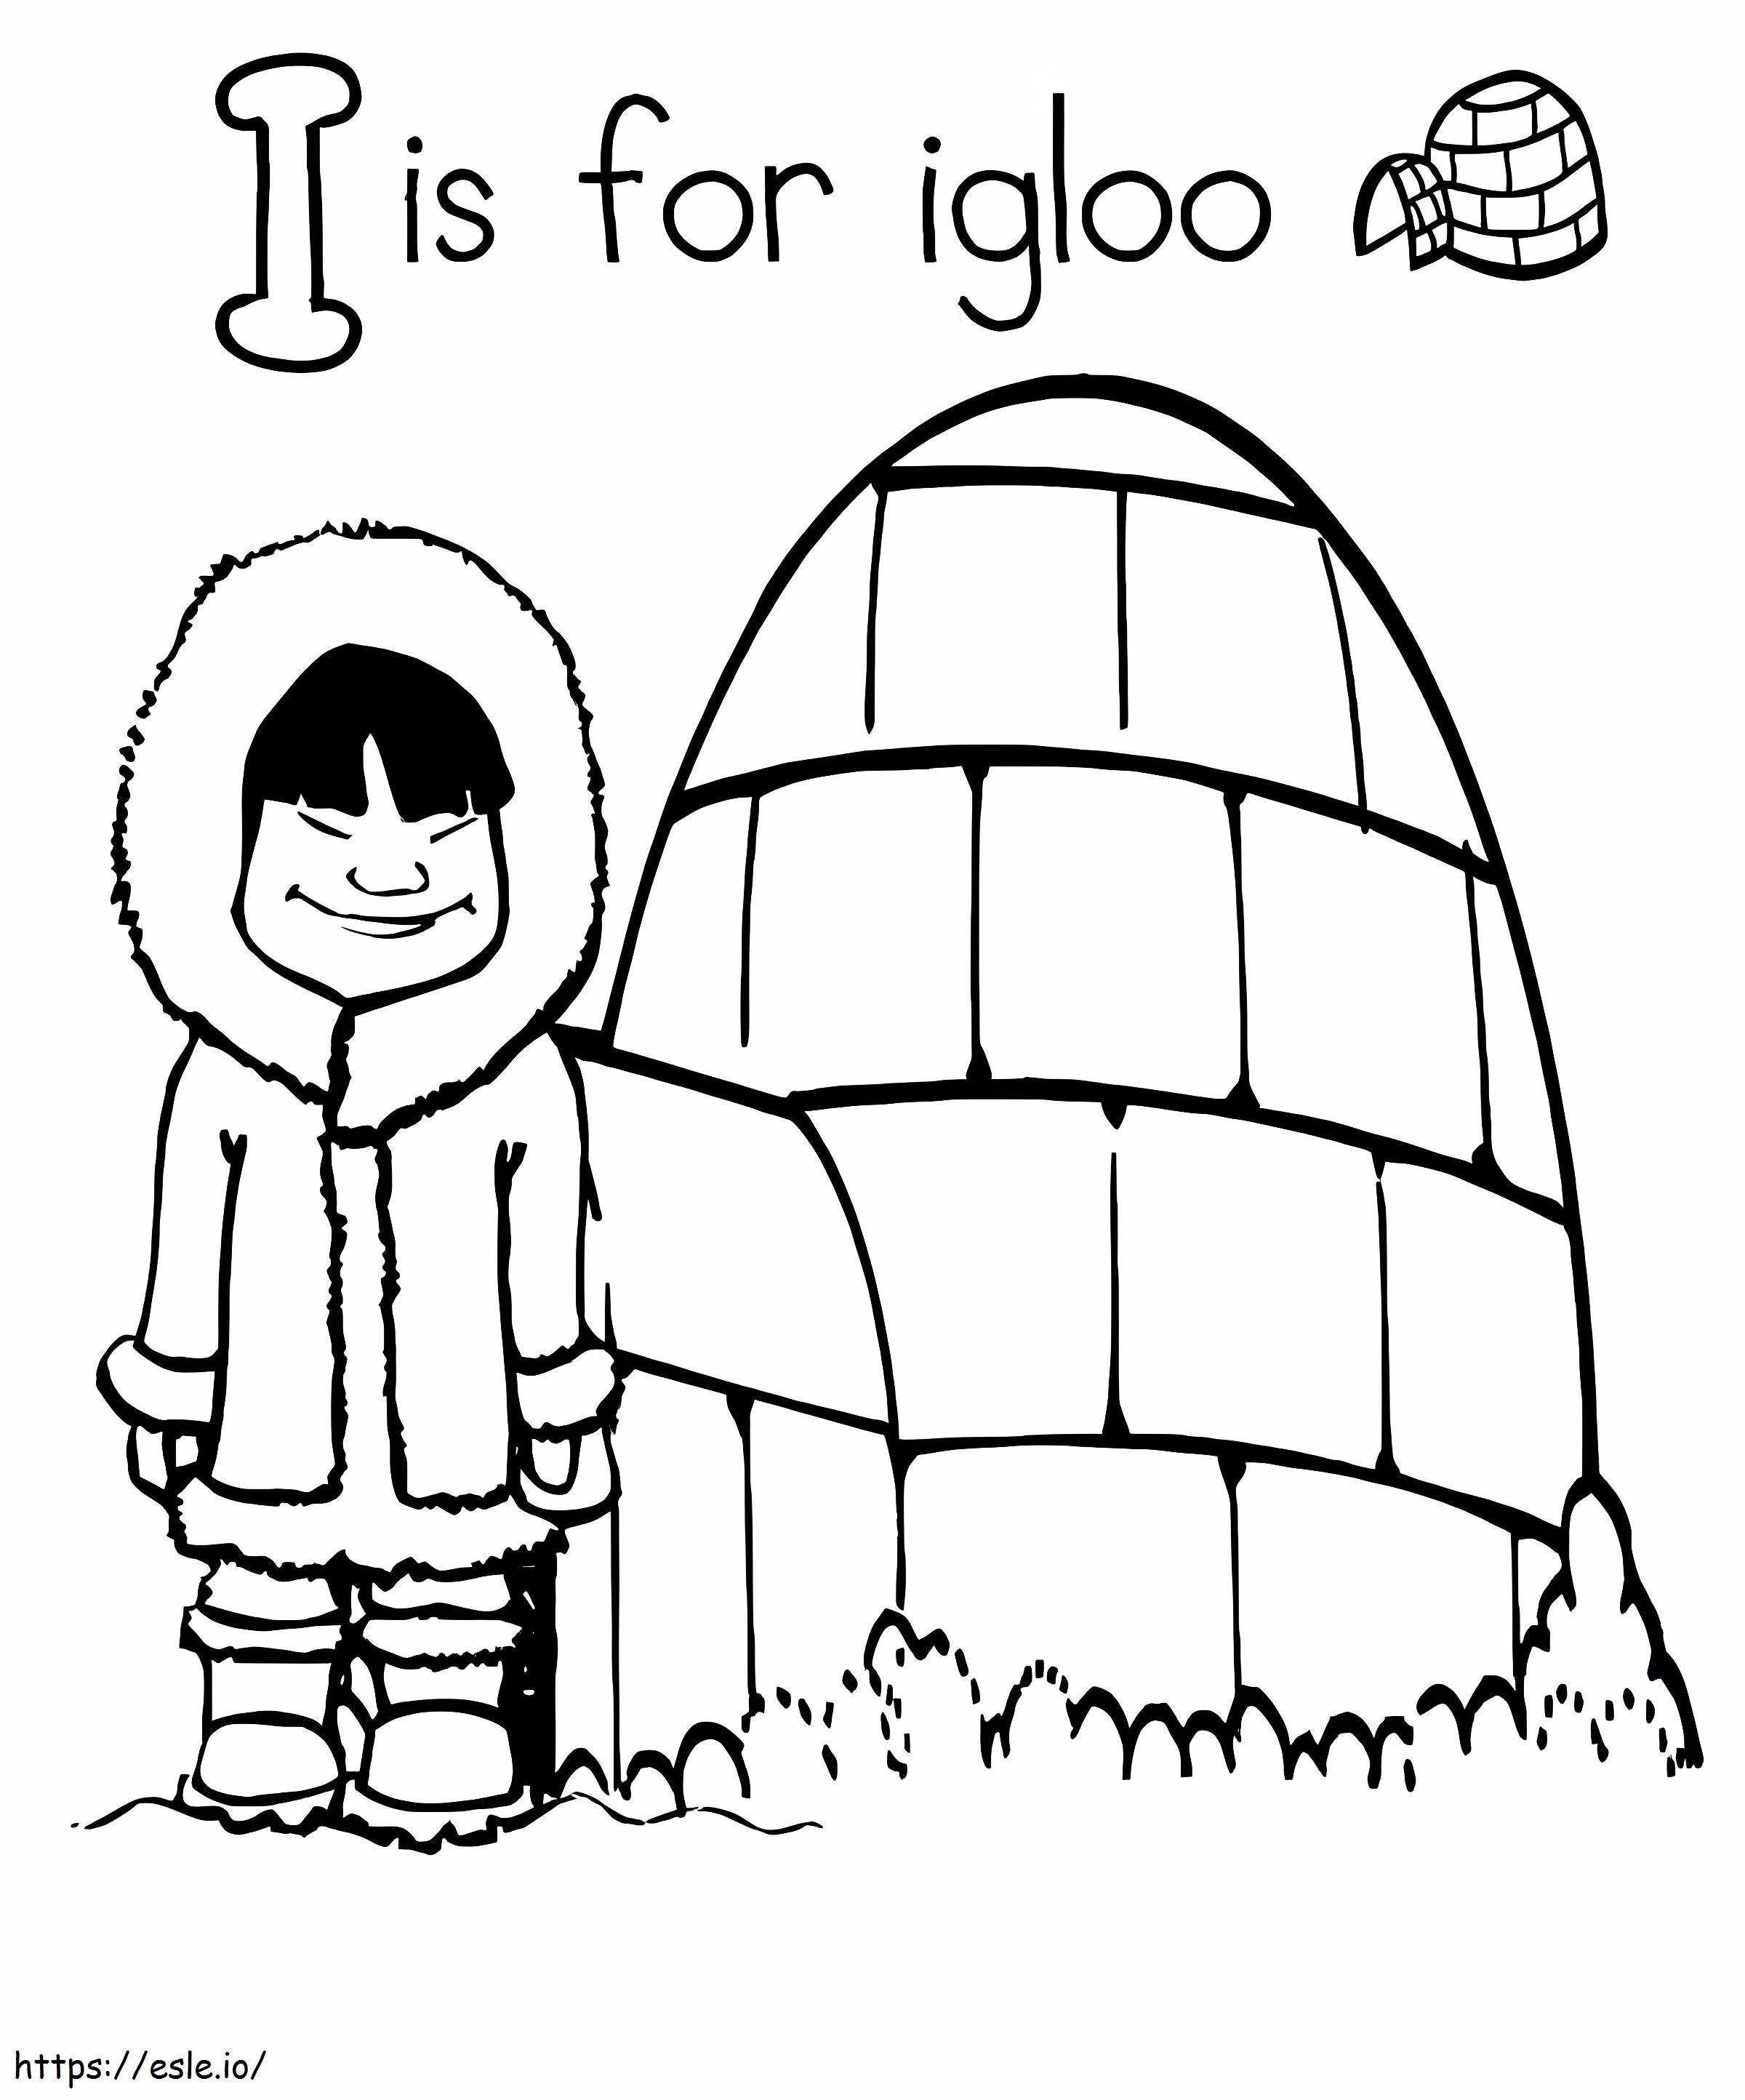 I is for igloo coloring page